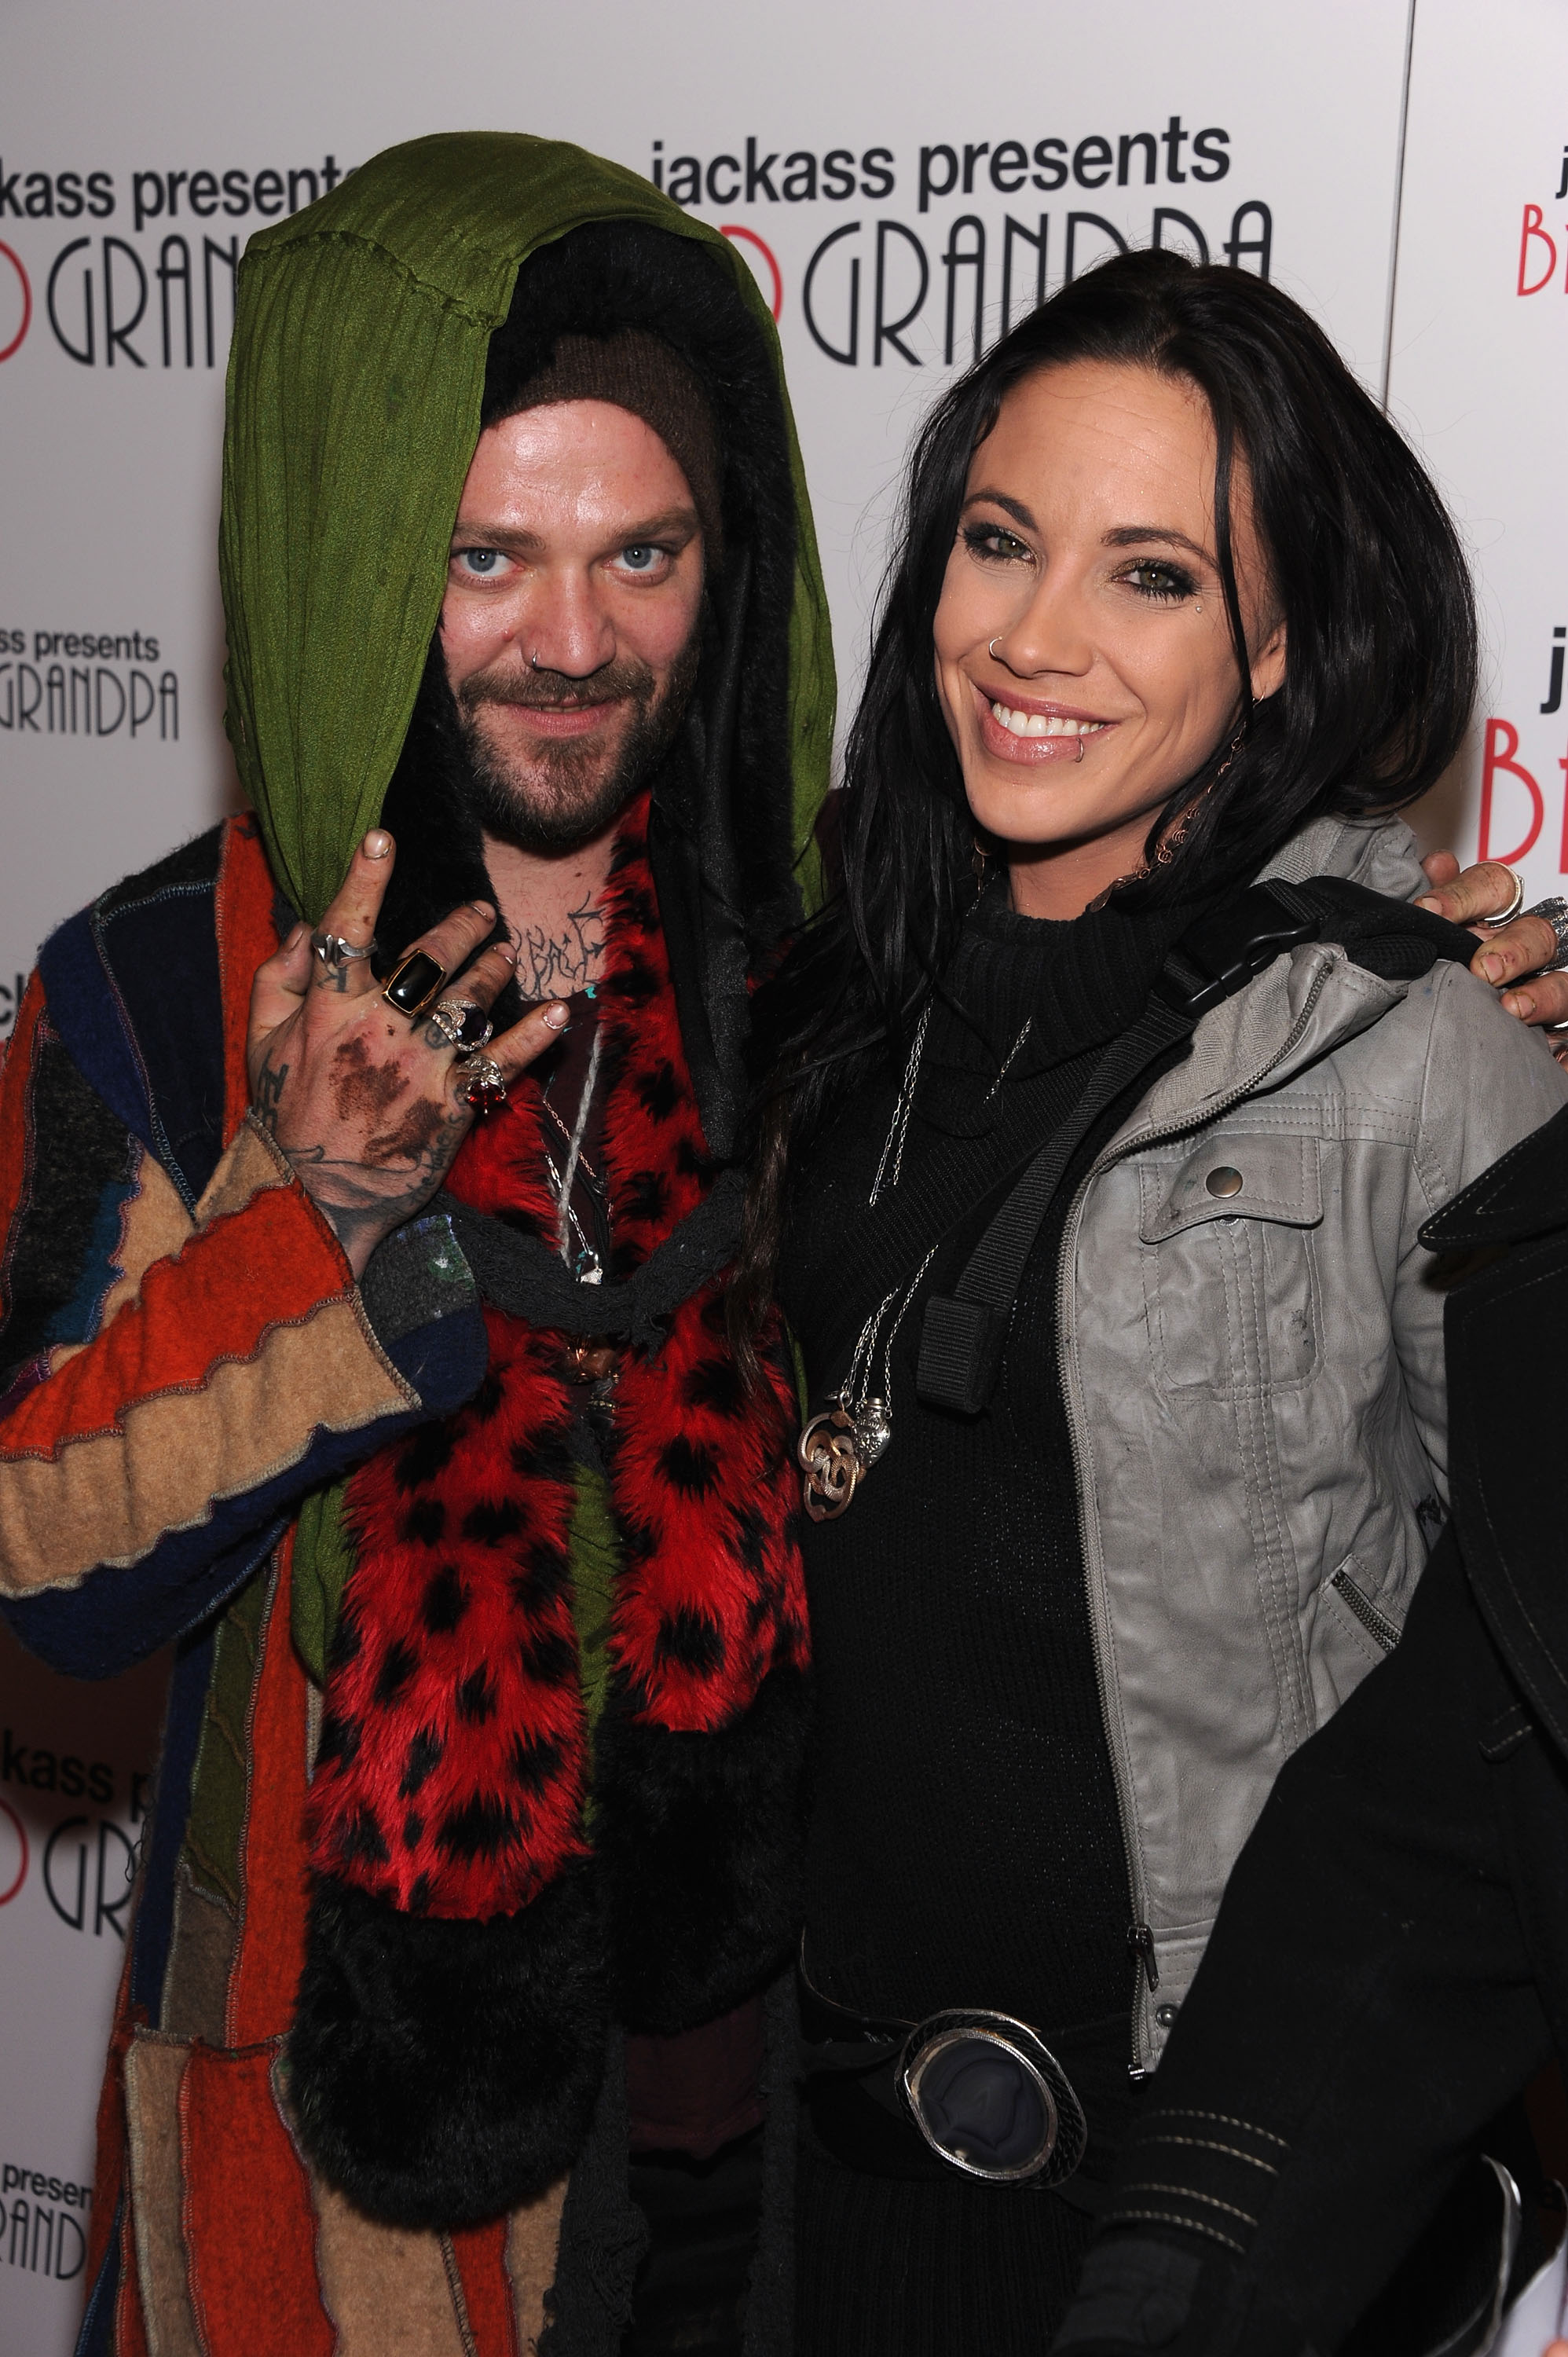 Bam Margera and Nicole Boyd attend "Jackass Presents: Bad Grandpa" New York special screening at Sunshine Landmark on October 21, 2013, in New York City | Source: Getty Images